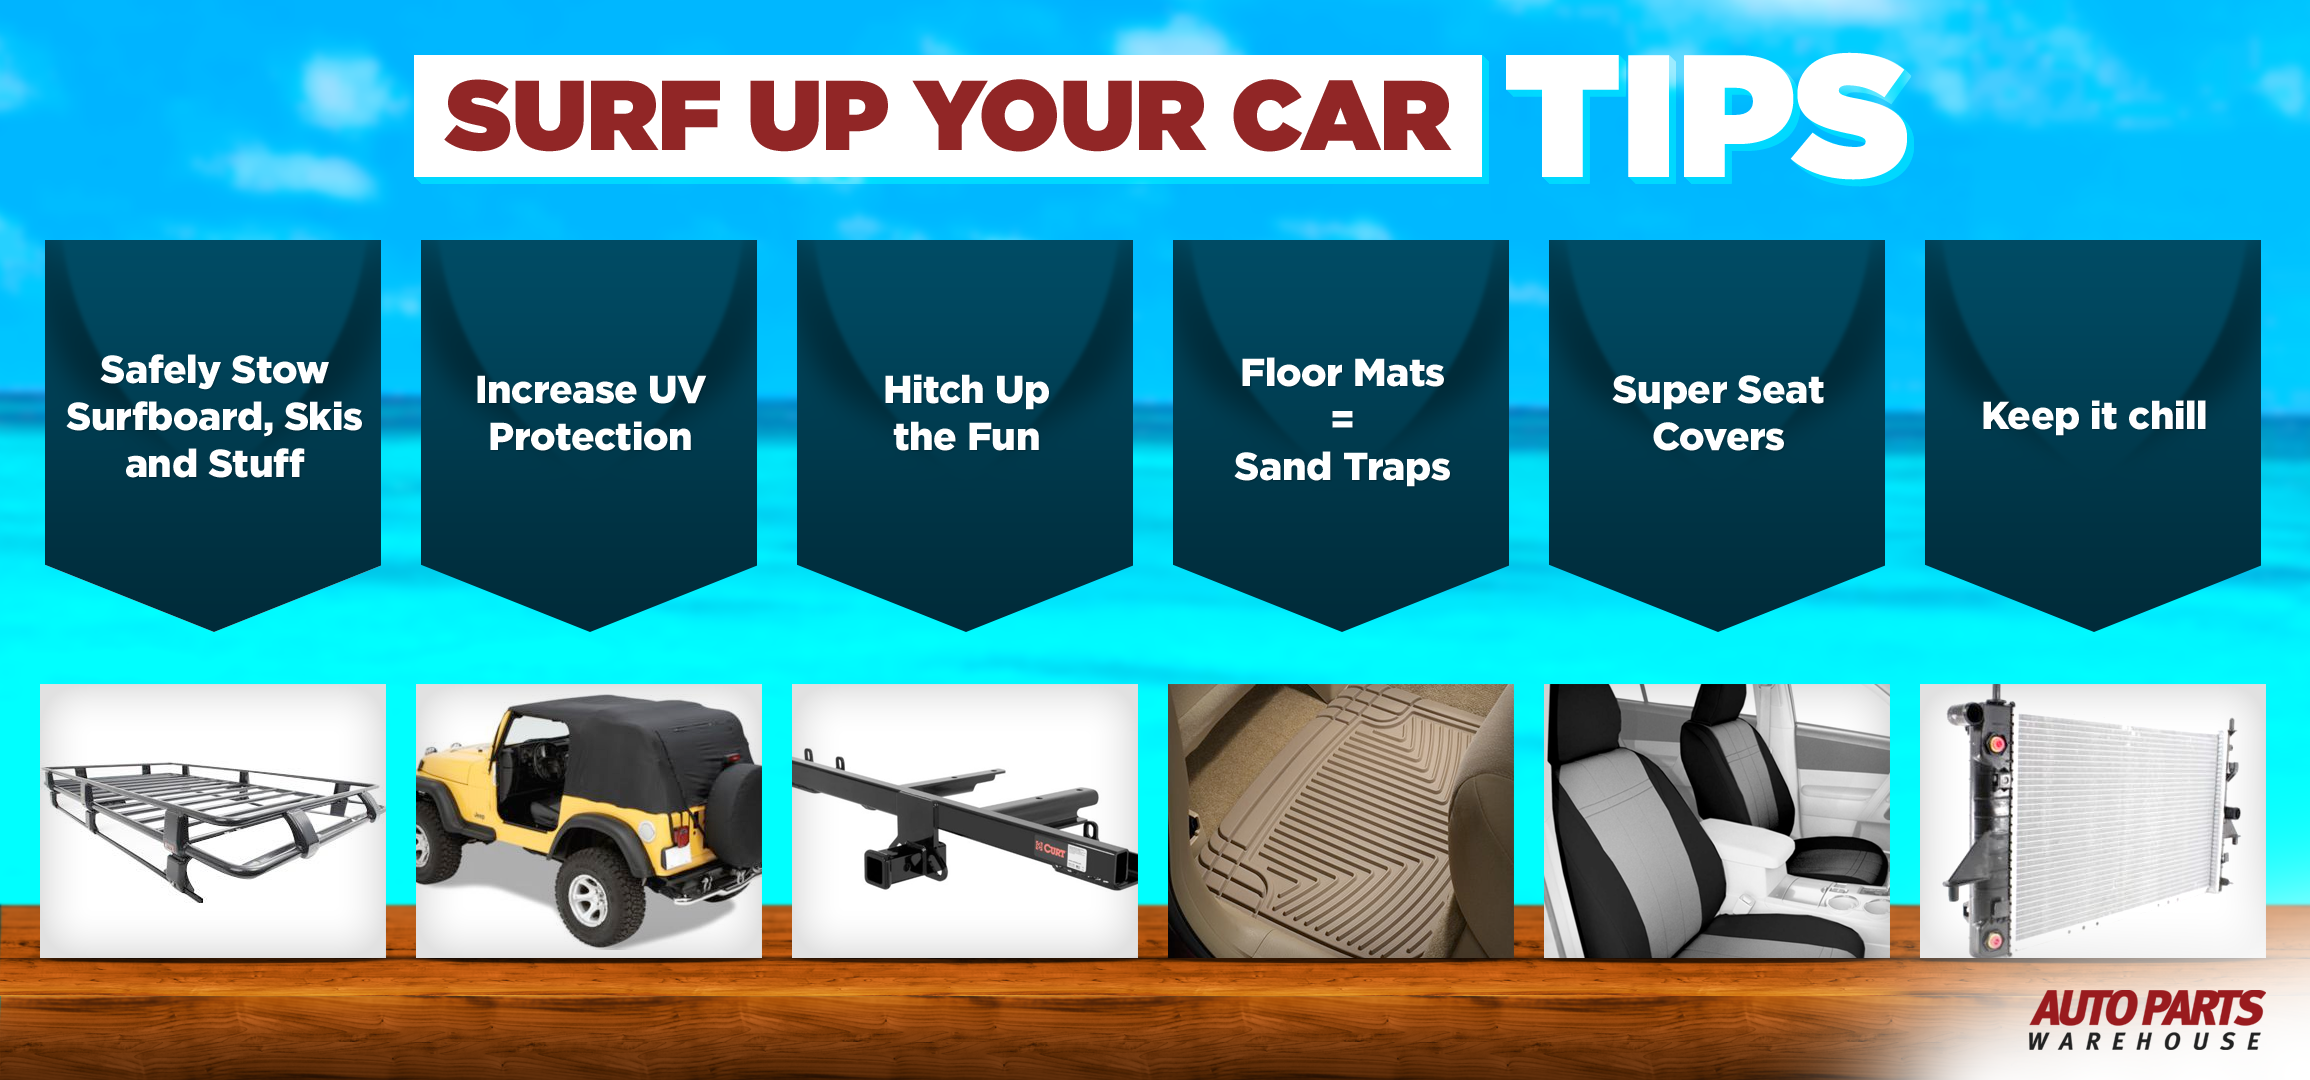 surf-up-your-car-summer-tips